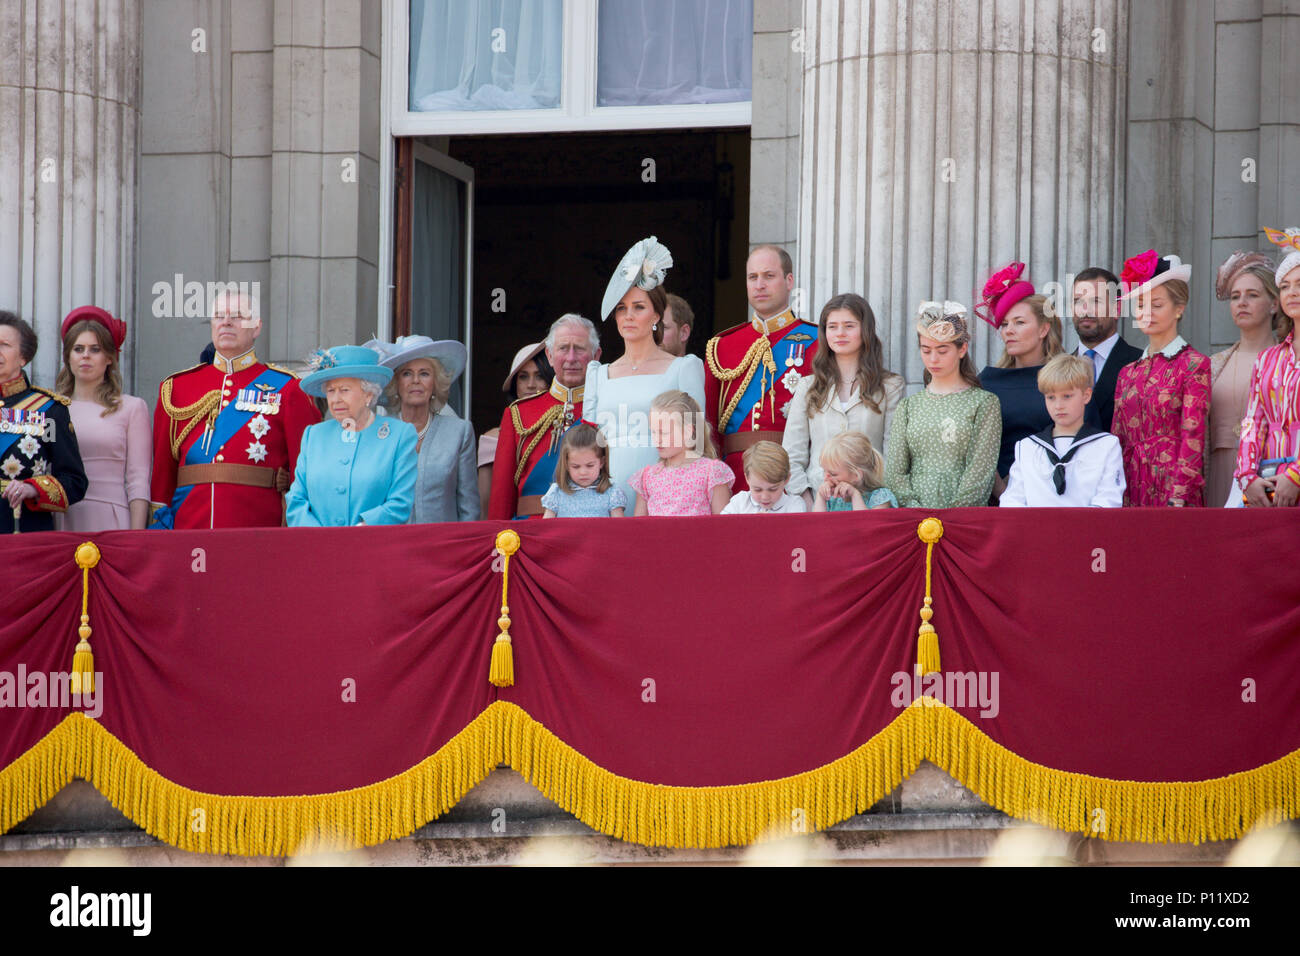 The Royal Family on the balcony of Buckingham Palace watching the flypast at the Trooping the Colour in London today.  The Duke and Duchess of Sussex have joined the Queen for the Trooping the Colour parade to mark her 92nd birthday.  Print Harry and Meghan Markle, who married last month, arrived as part of the carriage procession.  Large crowds of spectators gathered to watch Saturday's ceremony, which saw around 1,000 soldiers march to Horse Guards Parade in Whitehall. Stock Photo